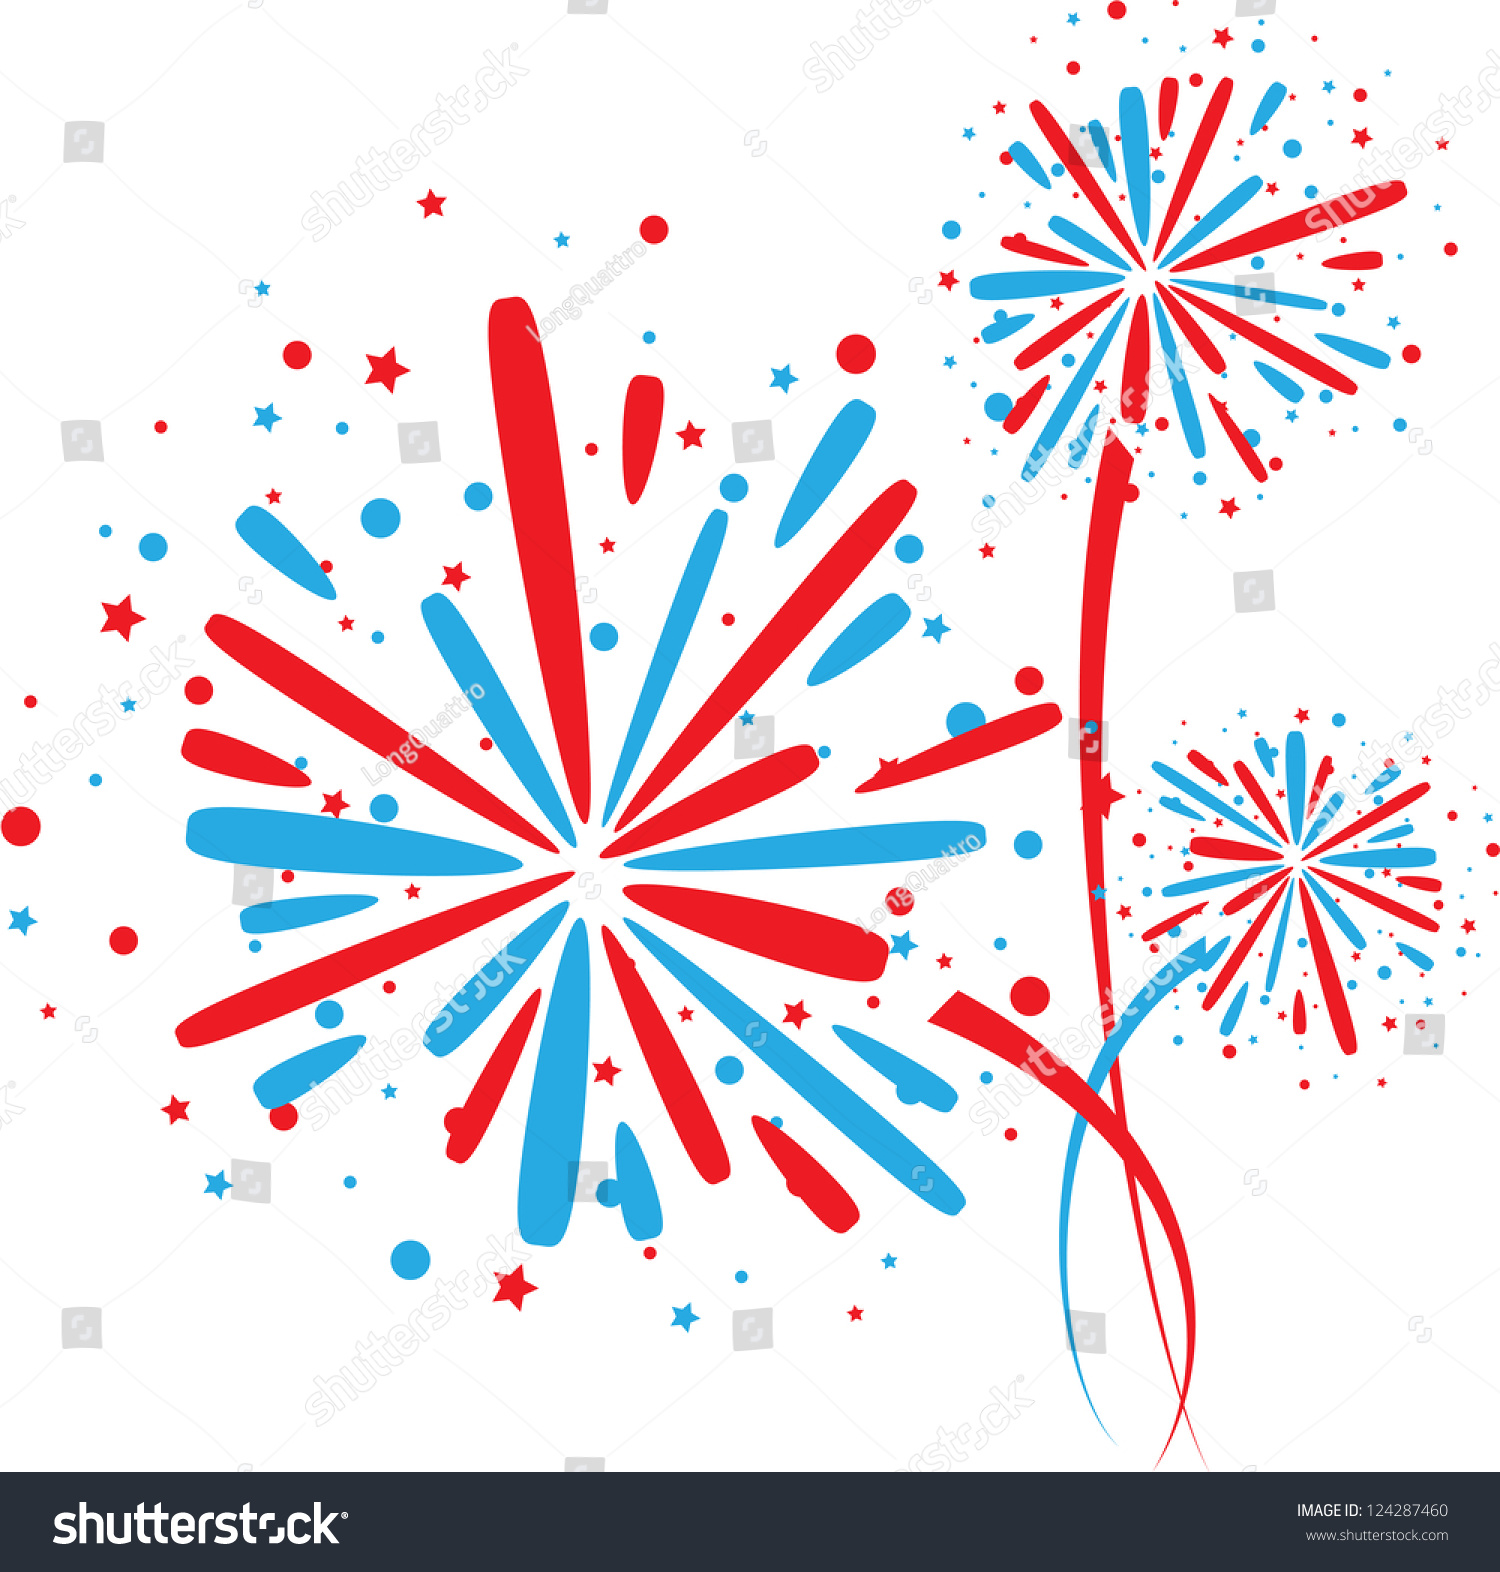 Big Red Blue Fireworks On White Stock Vector 124287460 ...